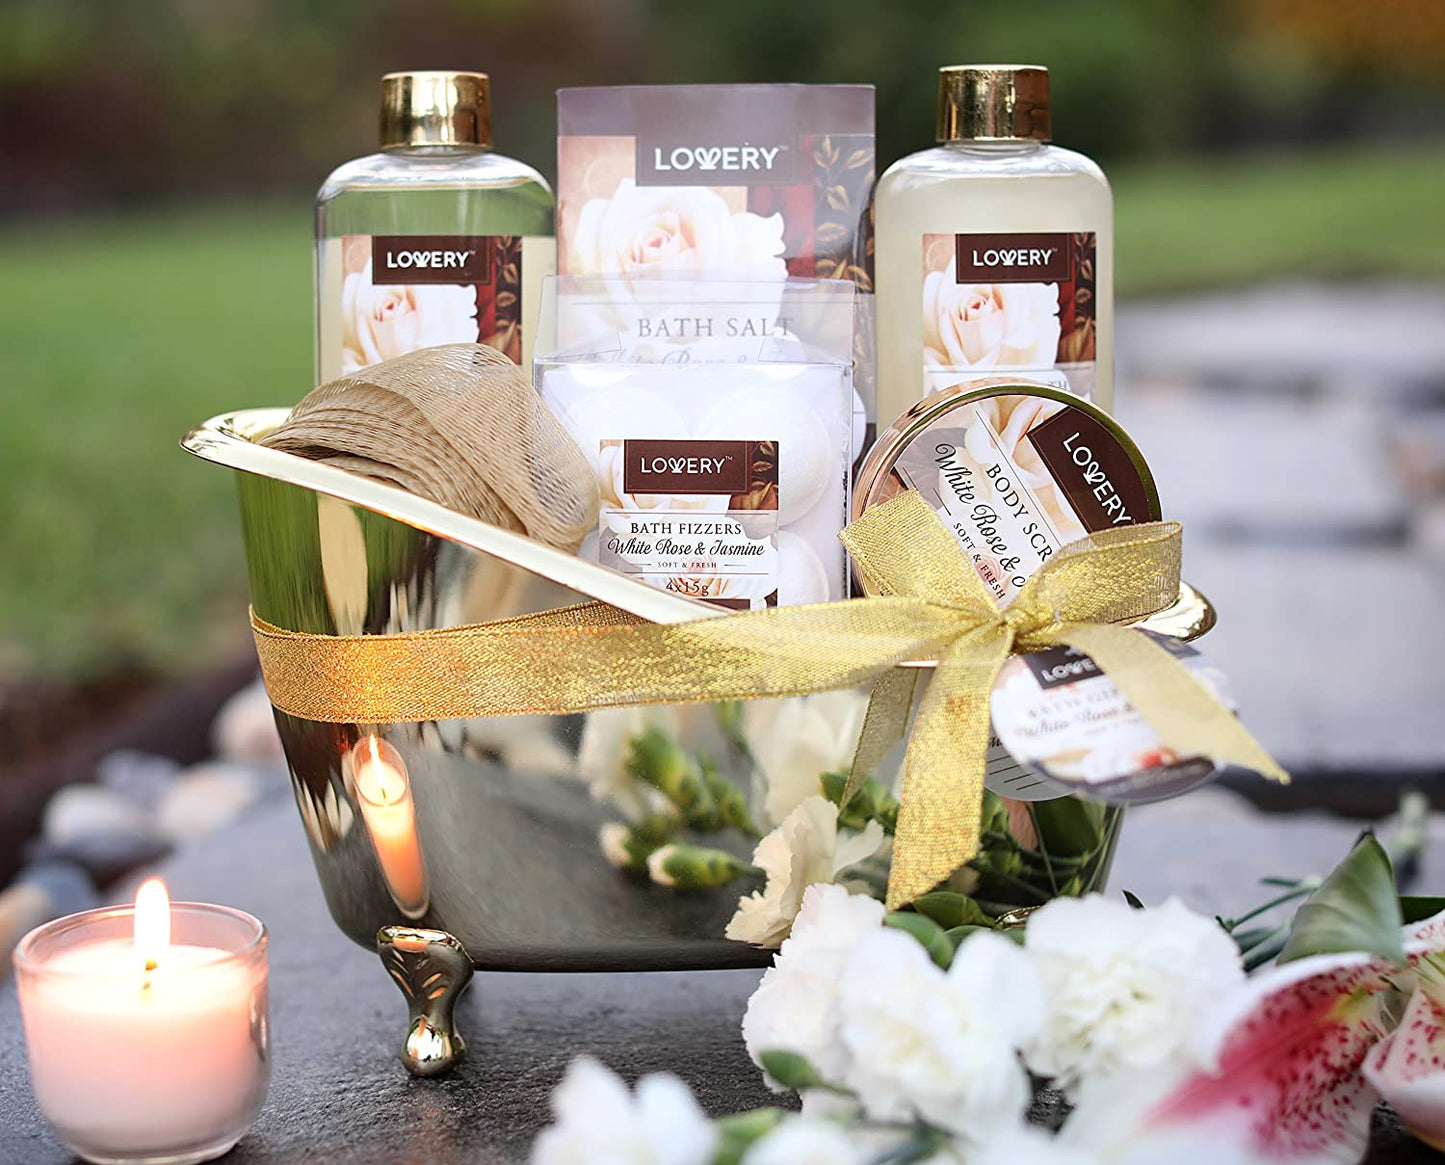 Buy our white jasmine spa gift set at